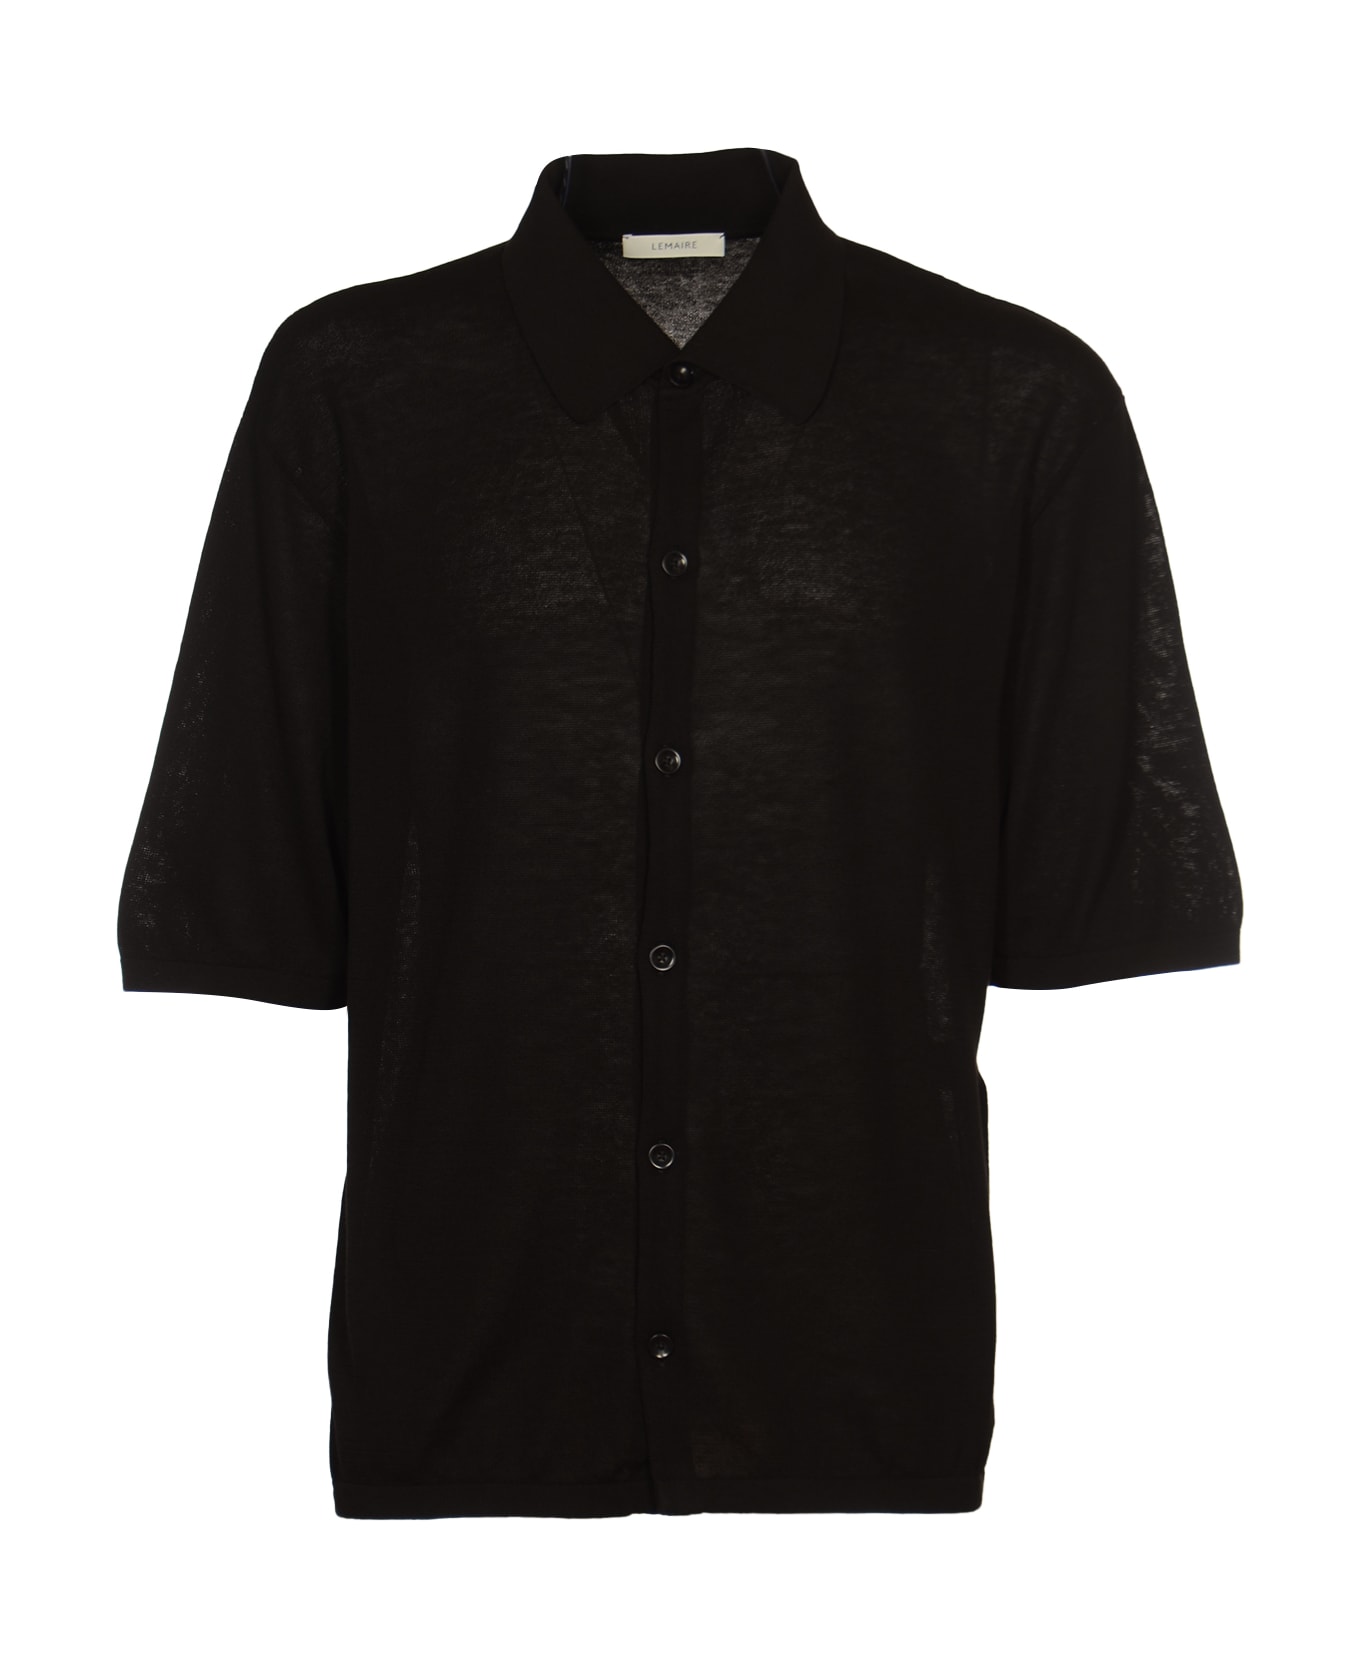 Lemaire Short-sleeved Knit Buttoned Polo Shirt - Black